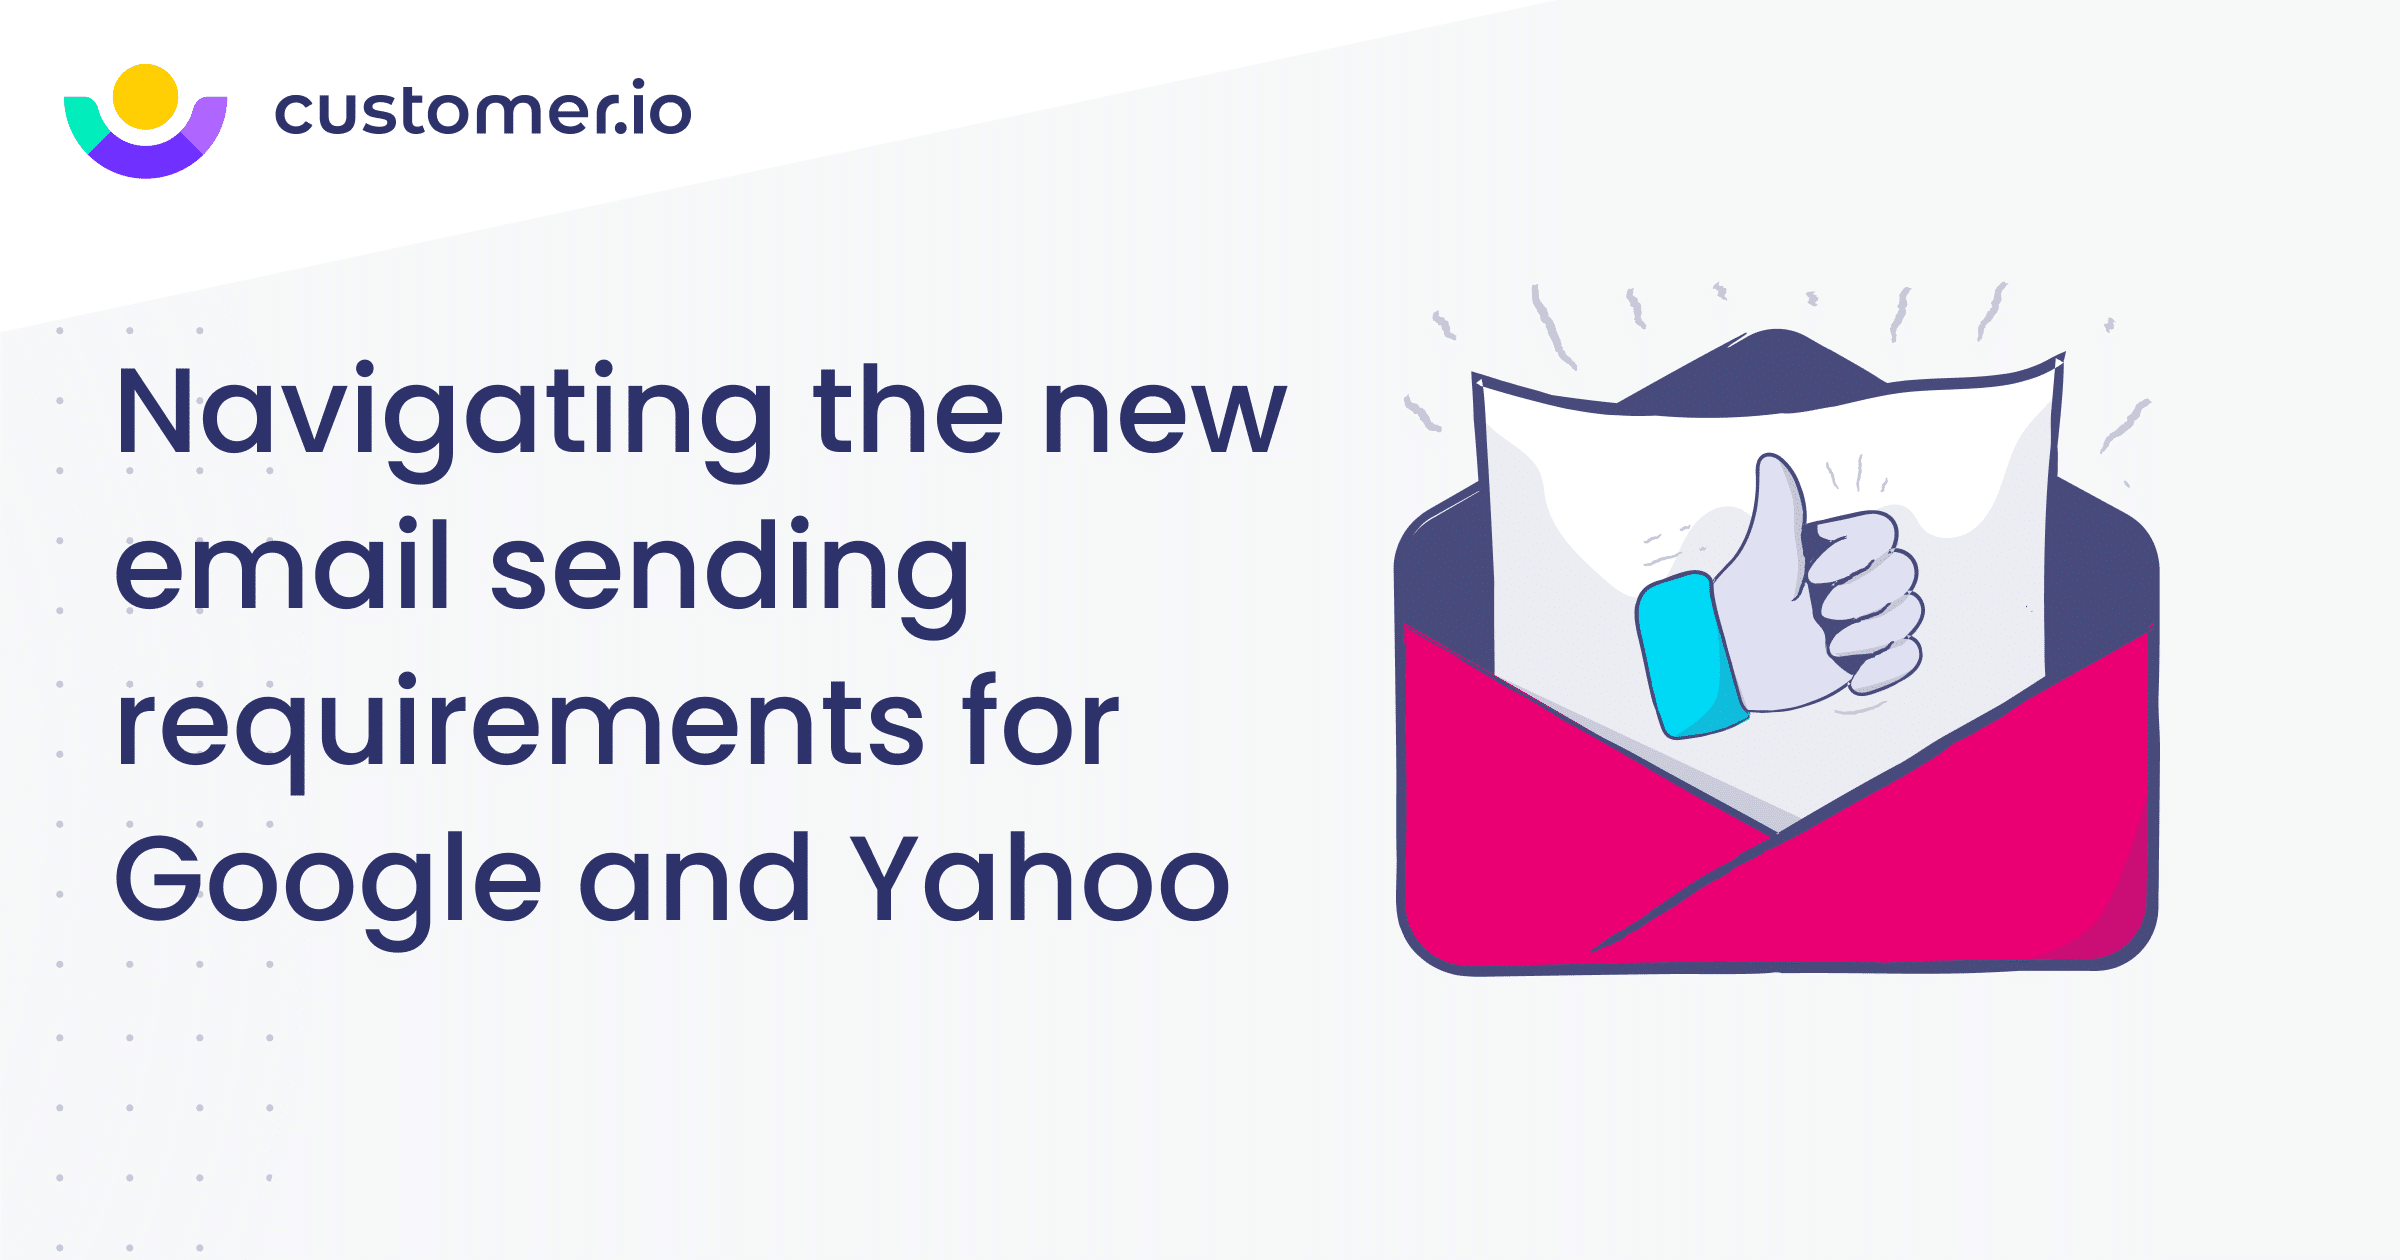 Yahoo Announces Email Policy Change Alongside Google